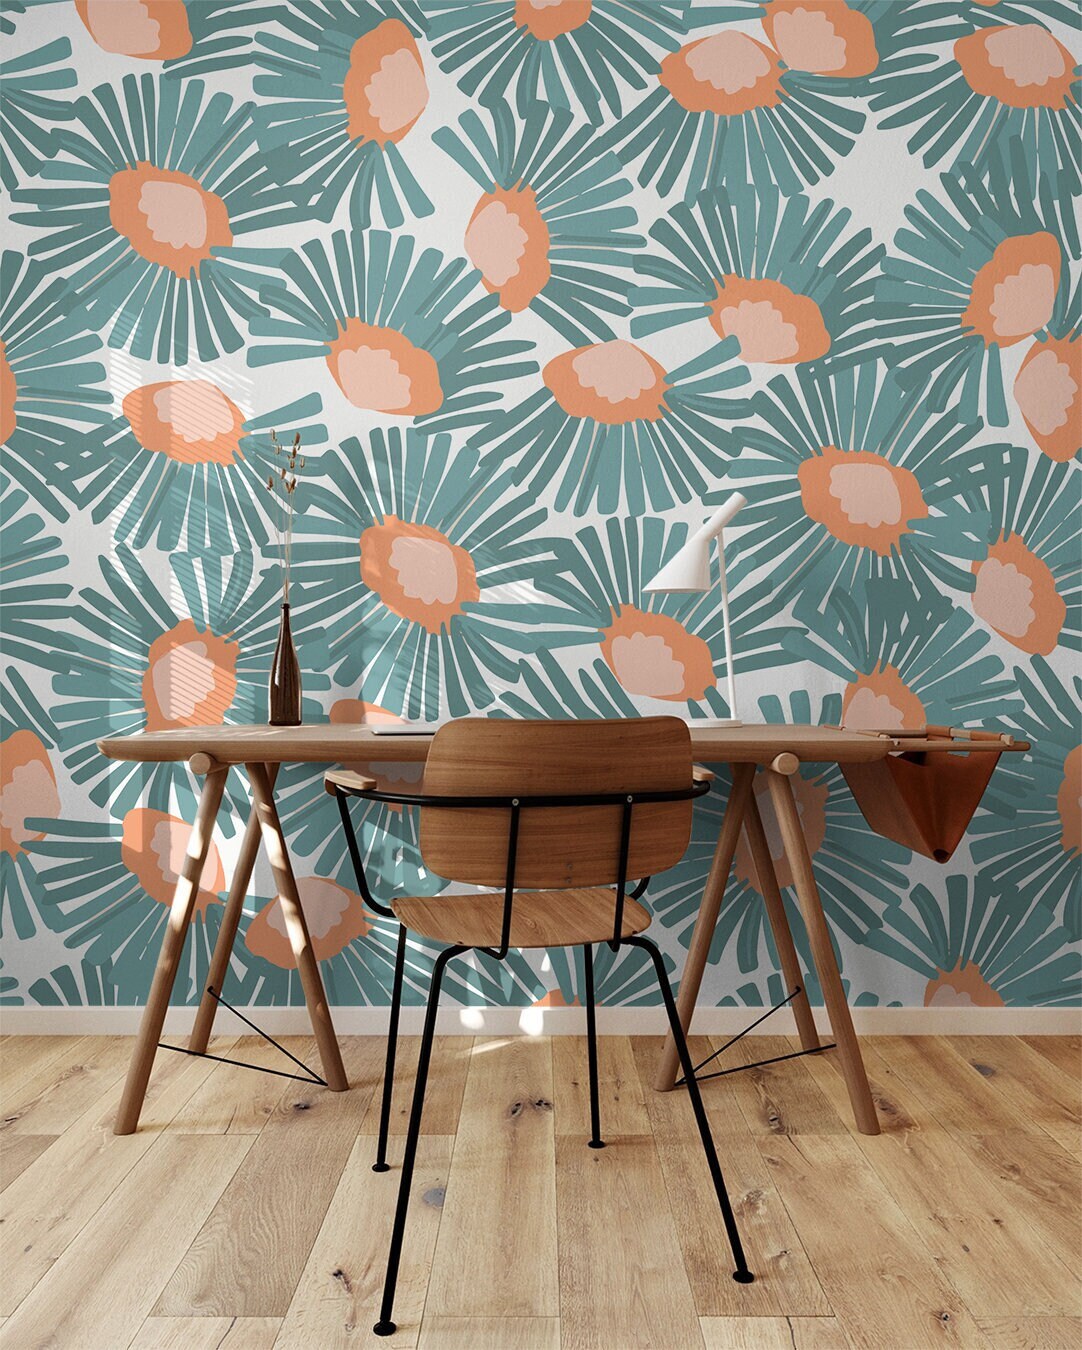 Wildflower Floral Wallpaper | Removable Wallpaper | Peel And Stick Wallpaper | Adhesive Wallpaper | Wall Paper Peel Stick Wall Mural 2309 - JamesAndColors